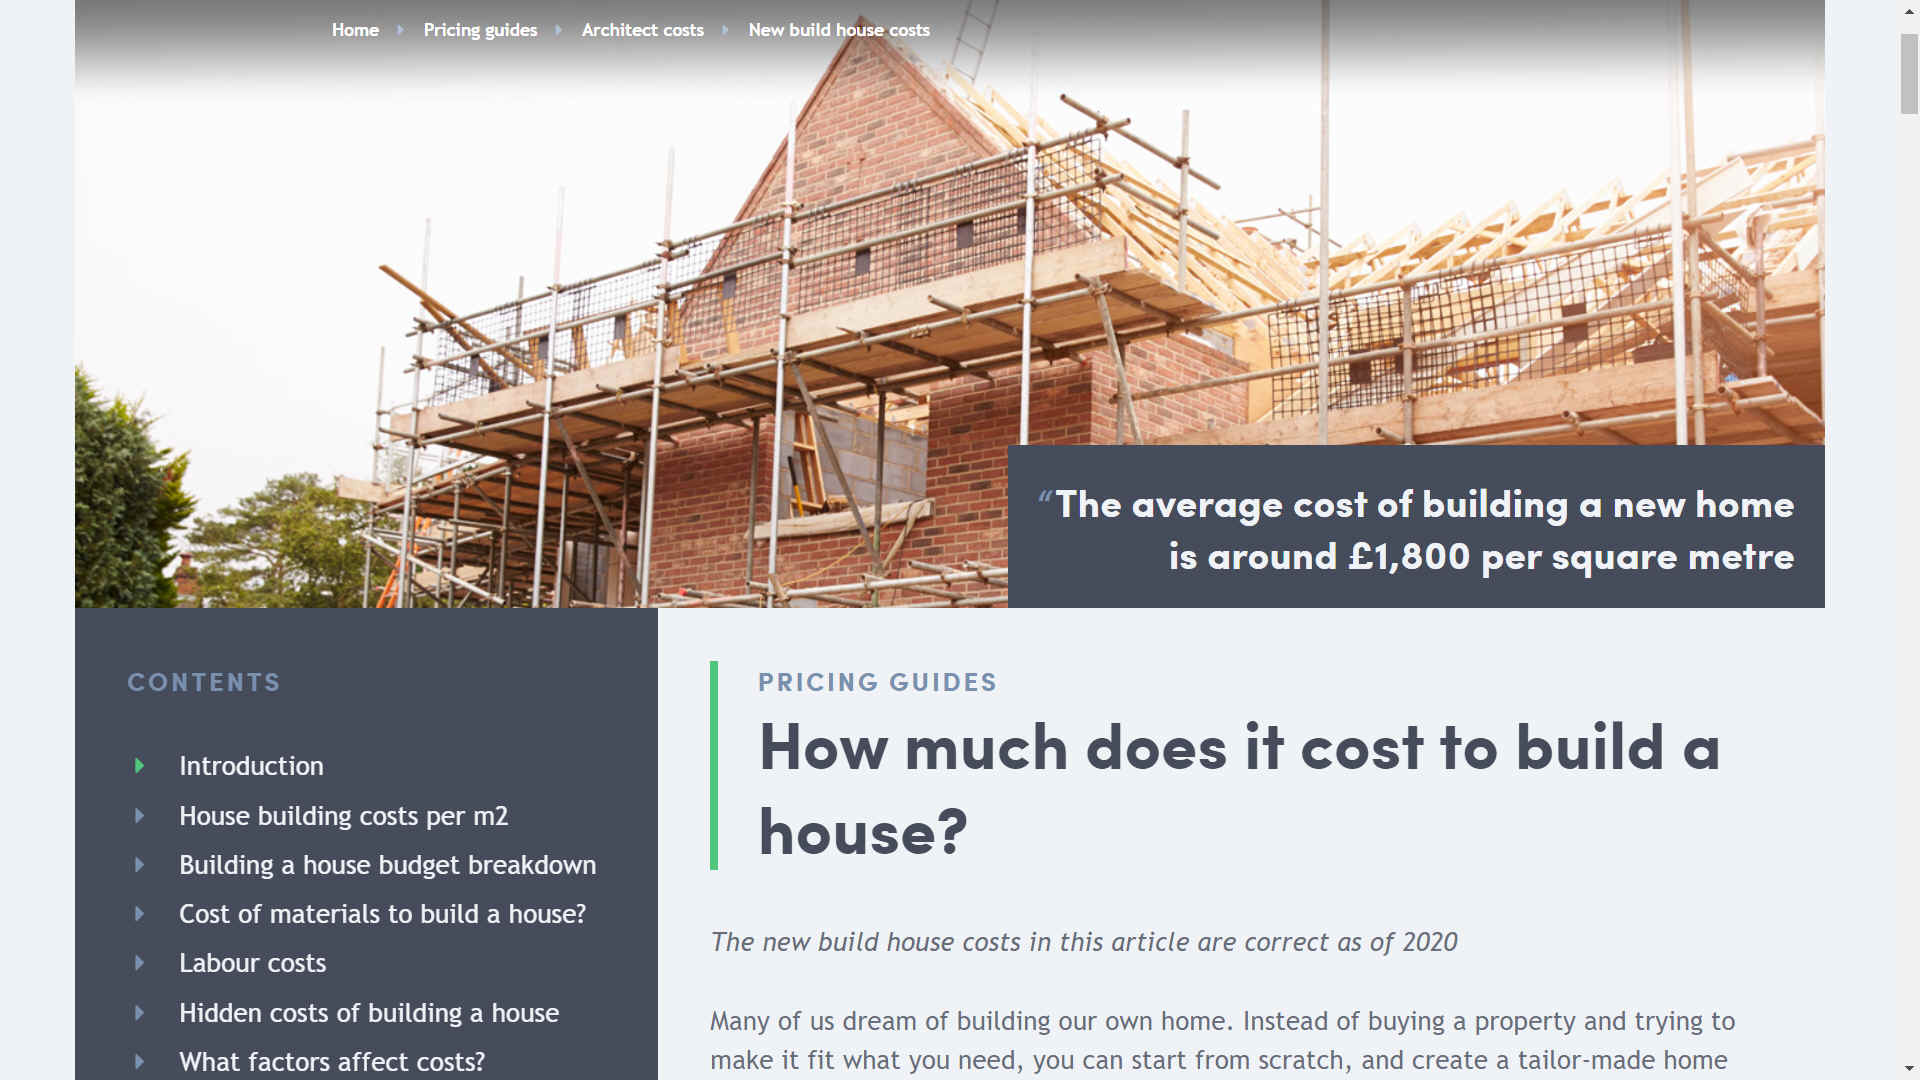 How much does it cost to build a house